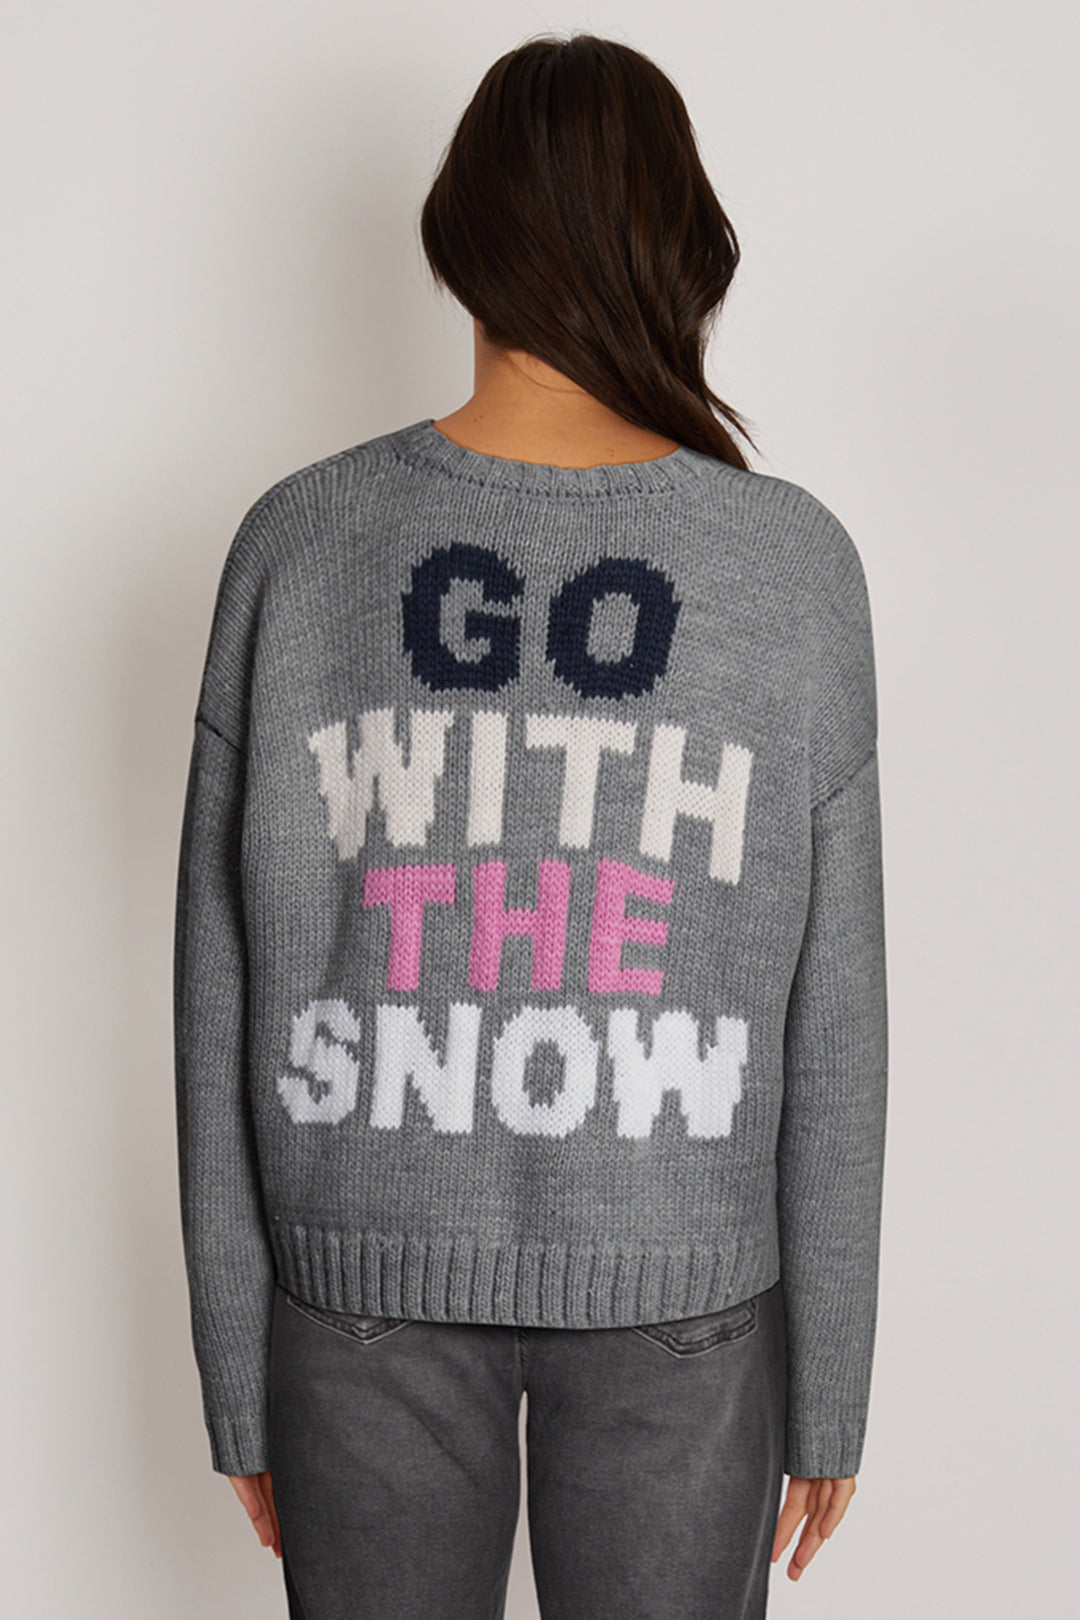 GO WITH SNOW SWEATER